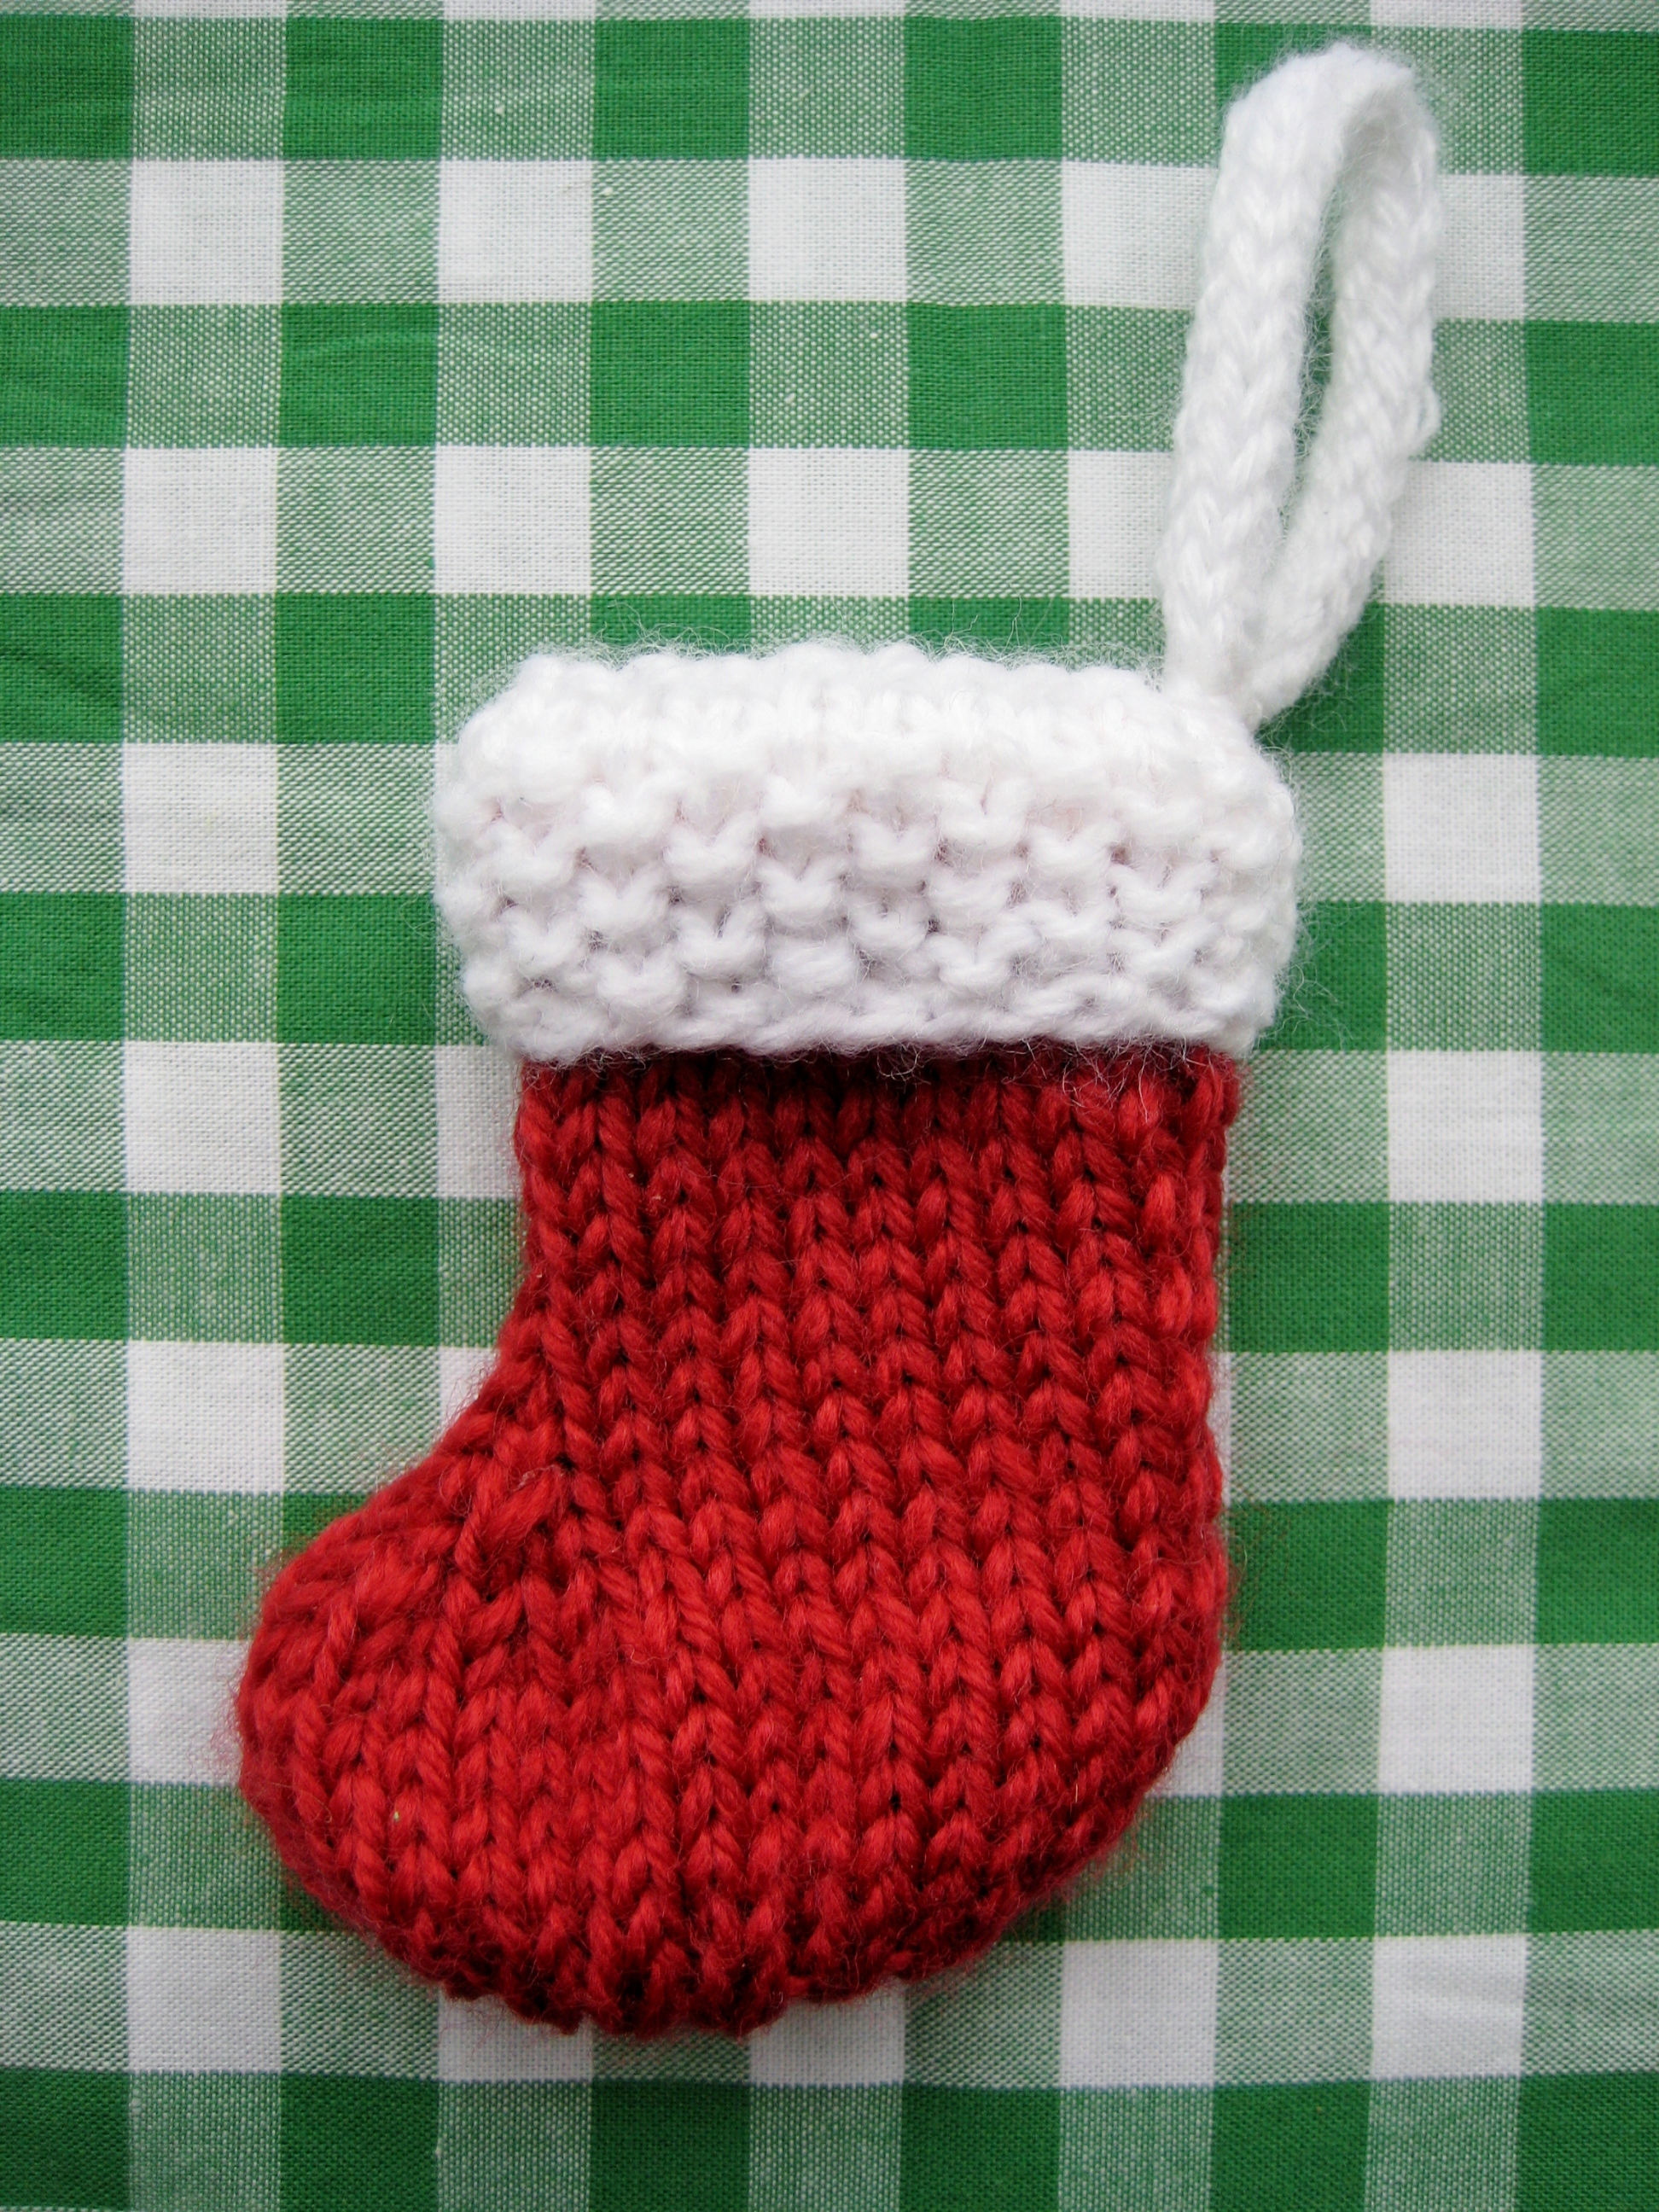 Christmas Stockings вЂ”
10 Easy and Unique Patterns - Craftfoxes